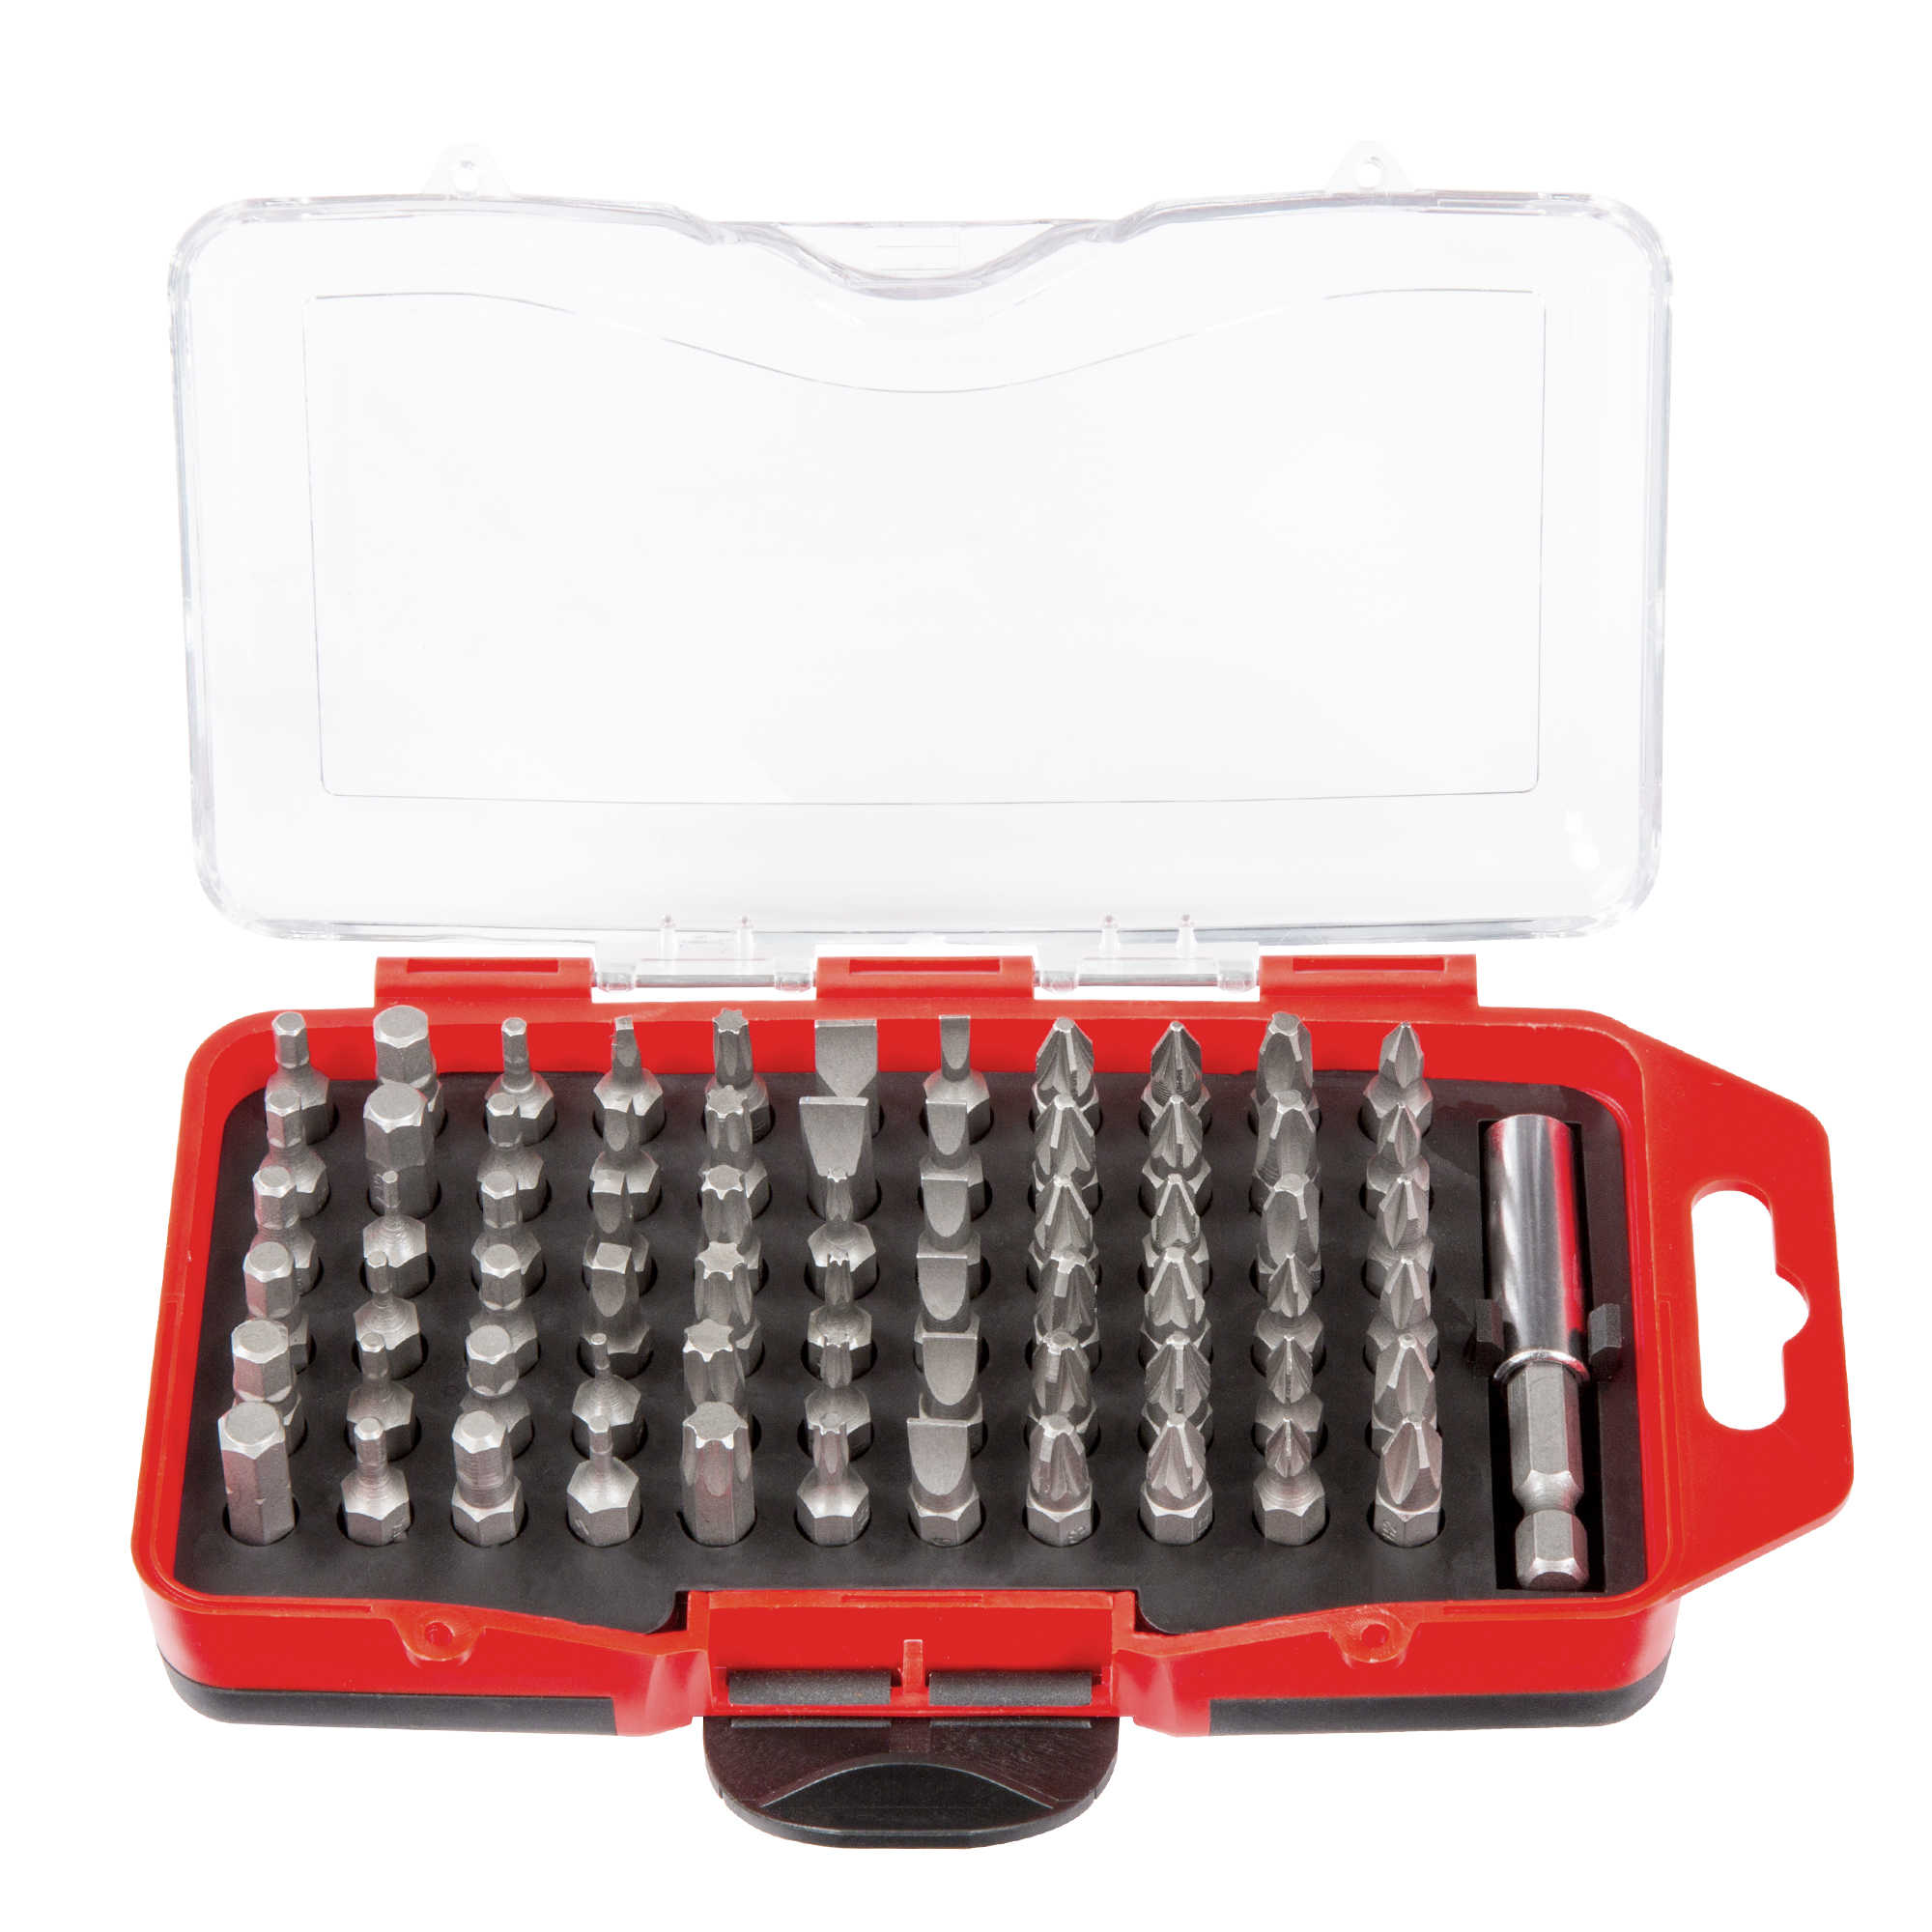 Ultimate Compact Screwdriver Bit Set 67 PC by Stalwart